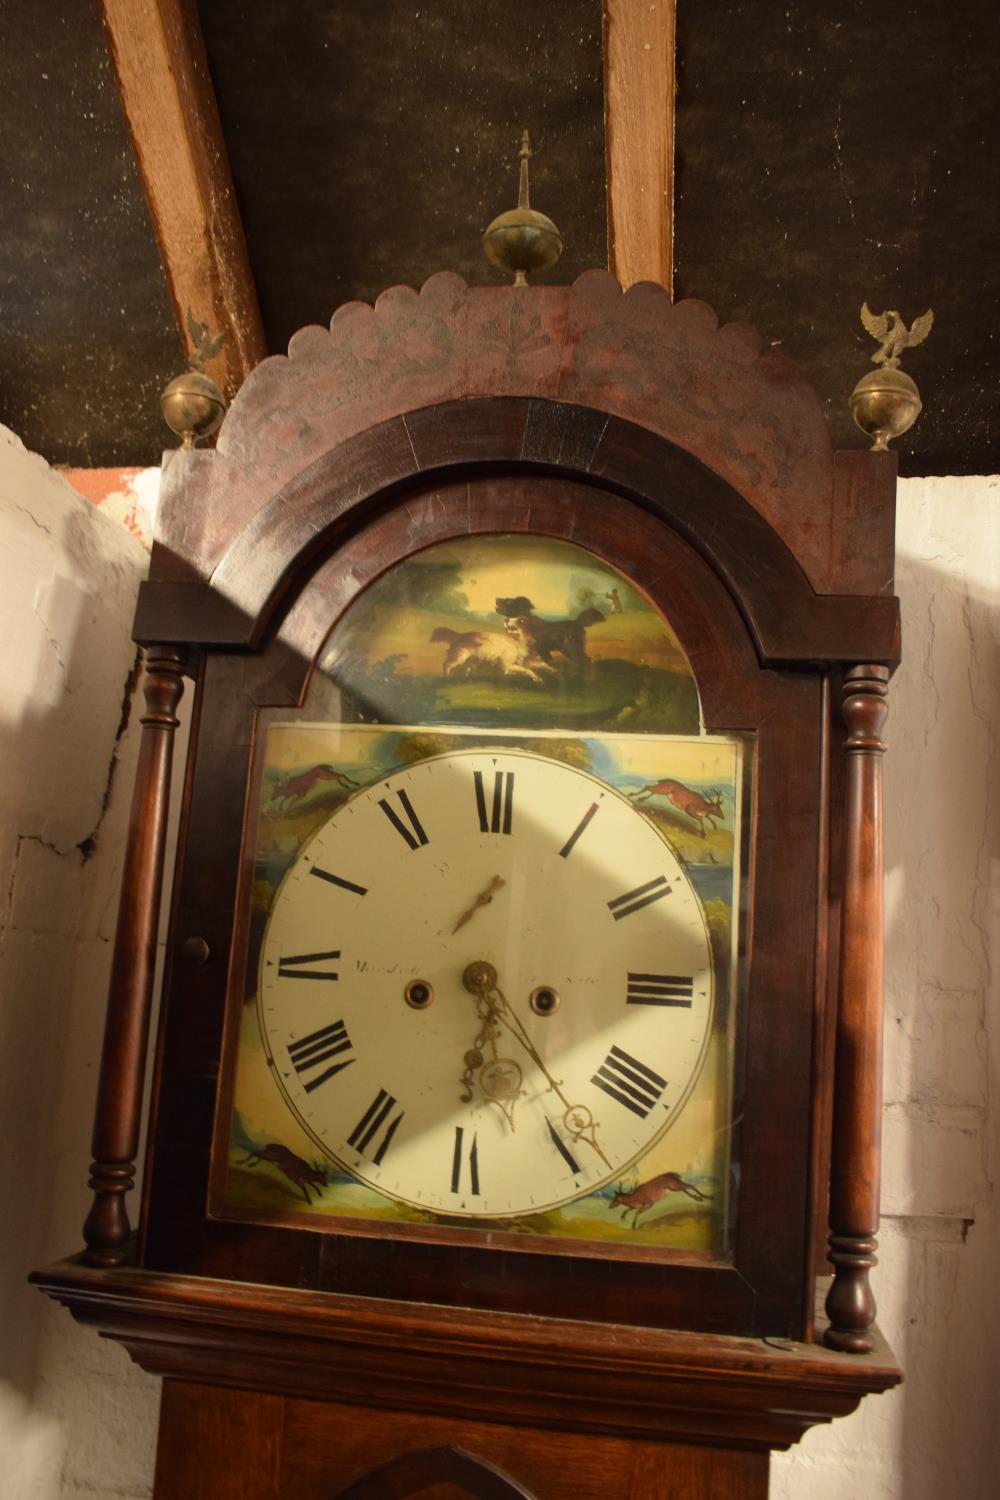 Victorian Grandfather clock, possibly from Sale, Manchester with hunting scenes - Image 2 of 6